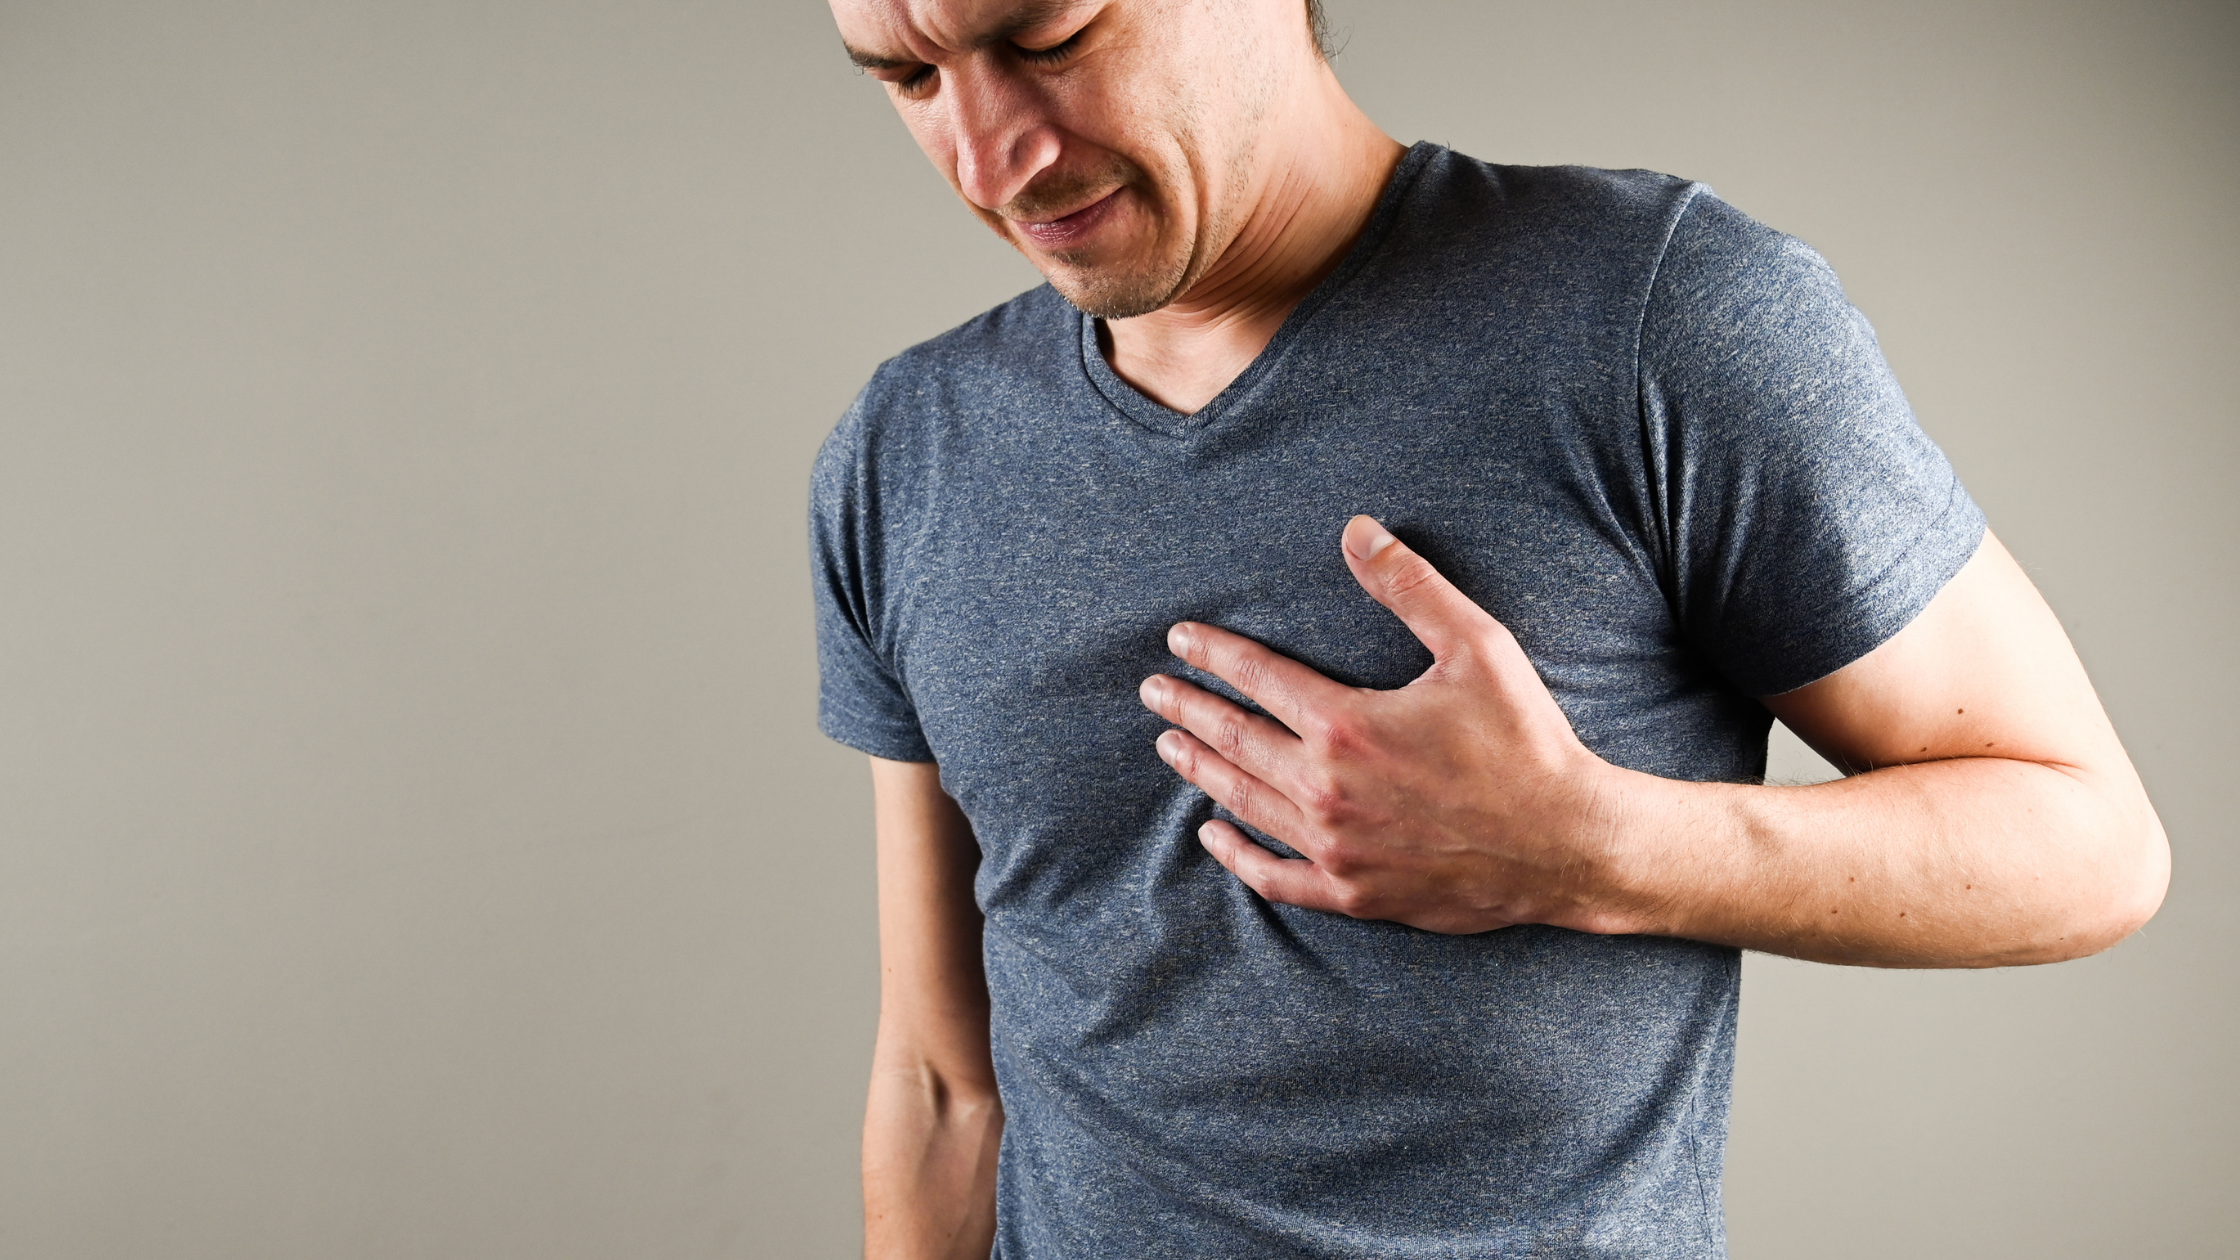 high cholesterol can cause chest pain